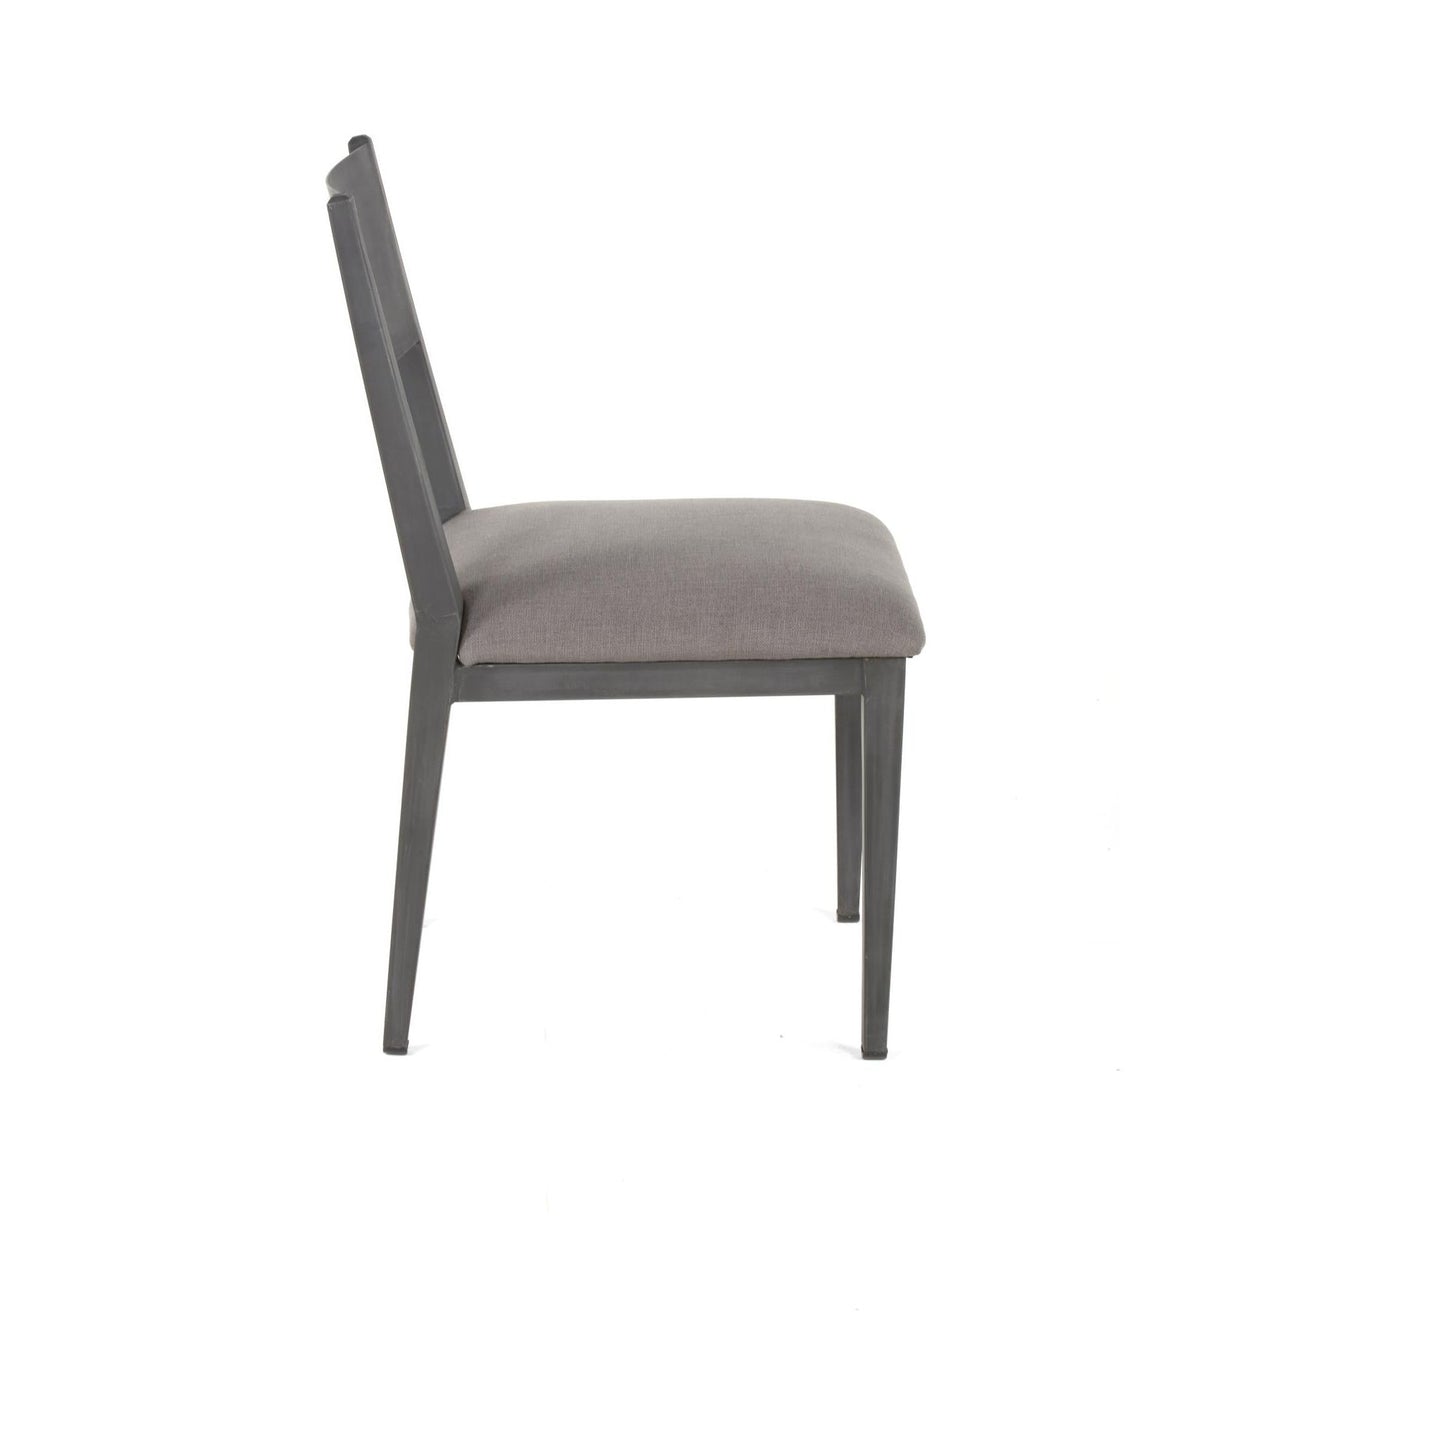 A side view of the Aubrey Metal Dining Chair showcases its modern design with a thin black iron frame and four legs. The Aubrey Metal Dining Chair features a slightly angled backrest for comfort and a padded seat, both upholstered in gray fabric. Its minimalist design gives this gray upholstered dining chair a sleek and elegant appearance.